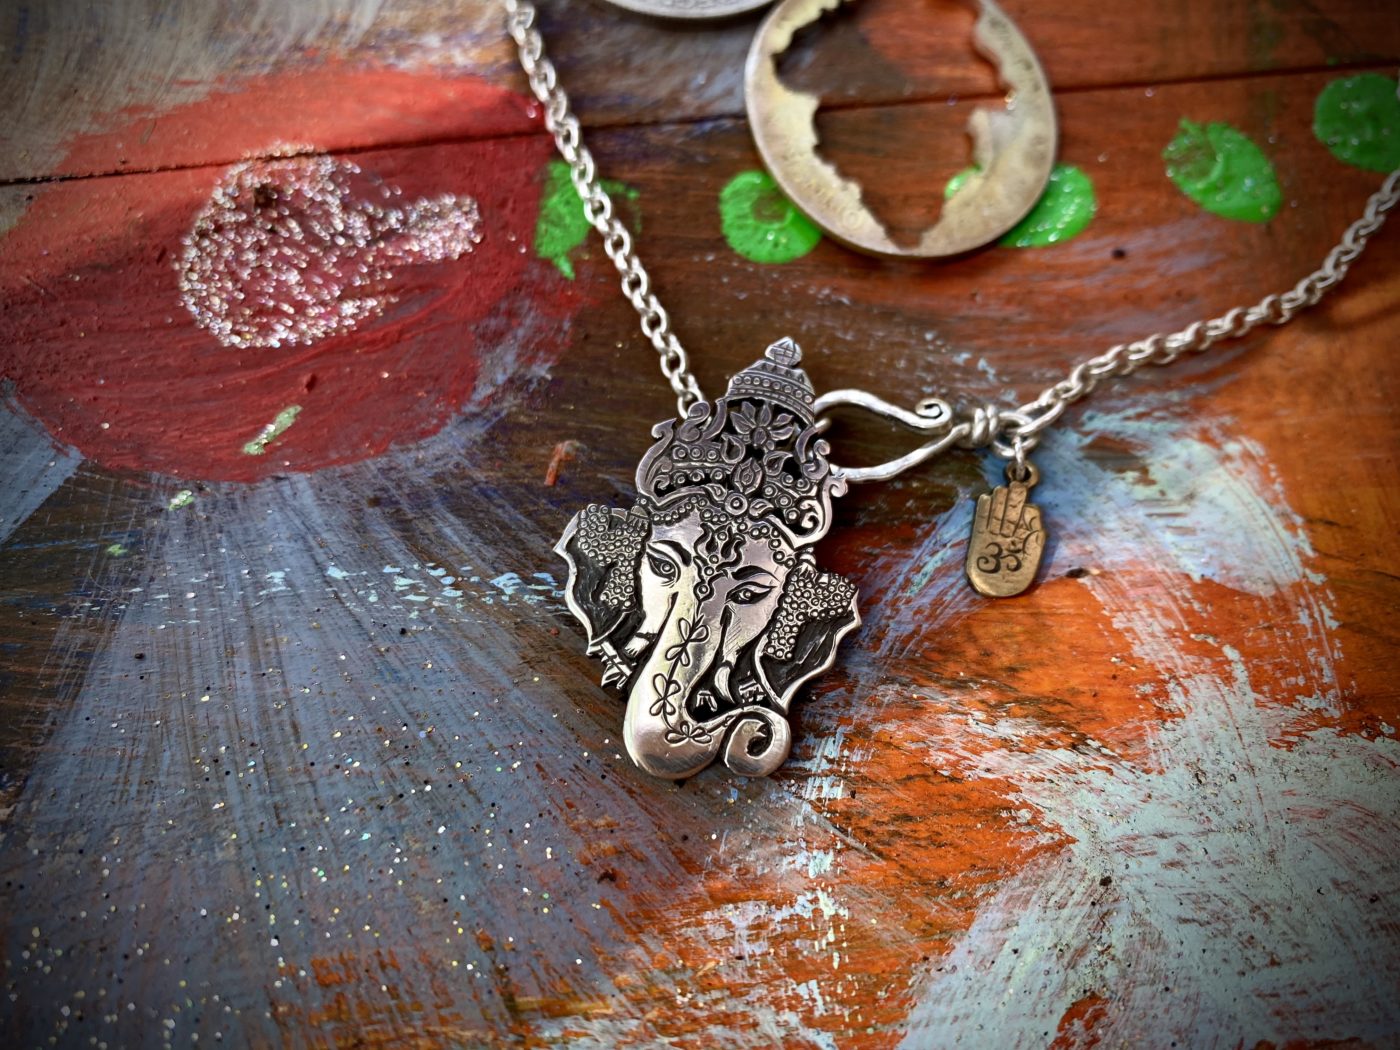 Ganesha silver pendant - handmade and recycled using silver coins